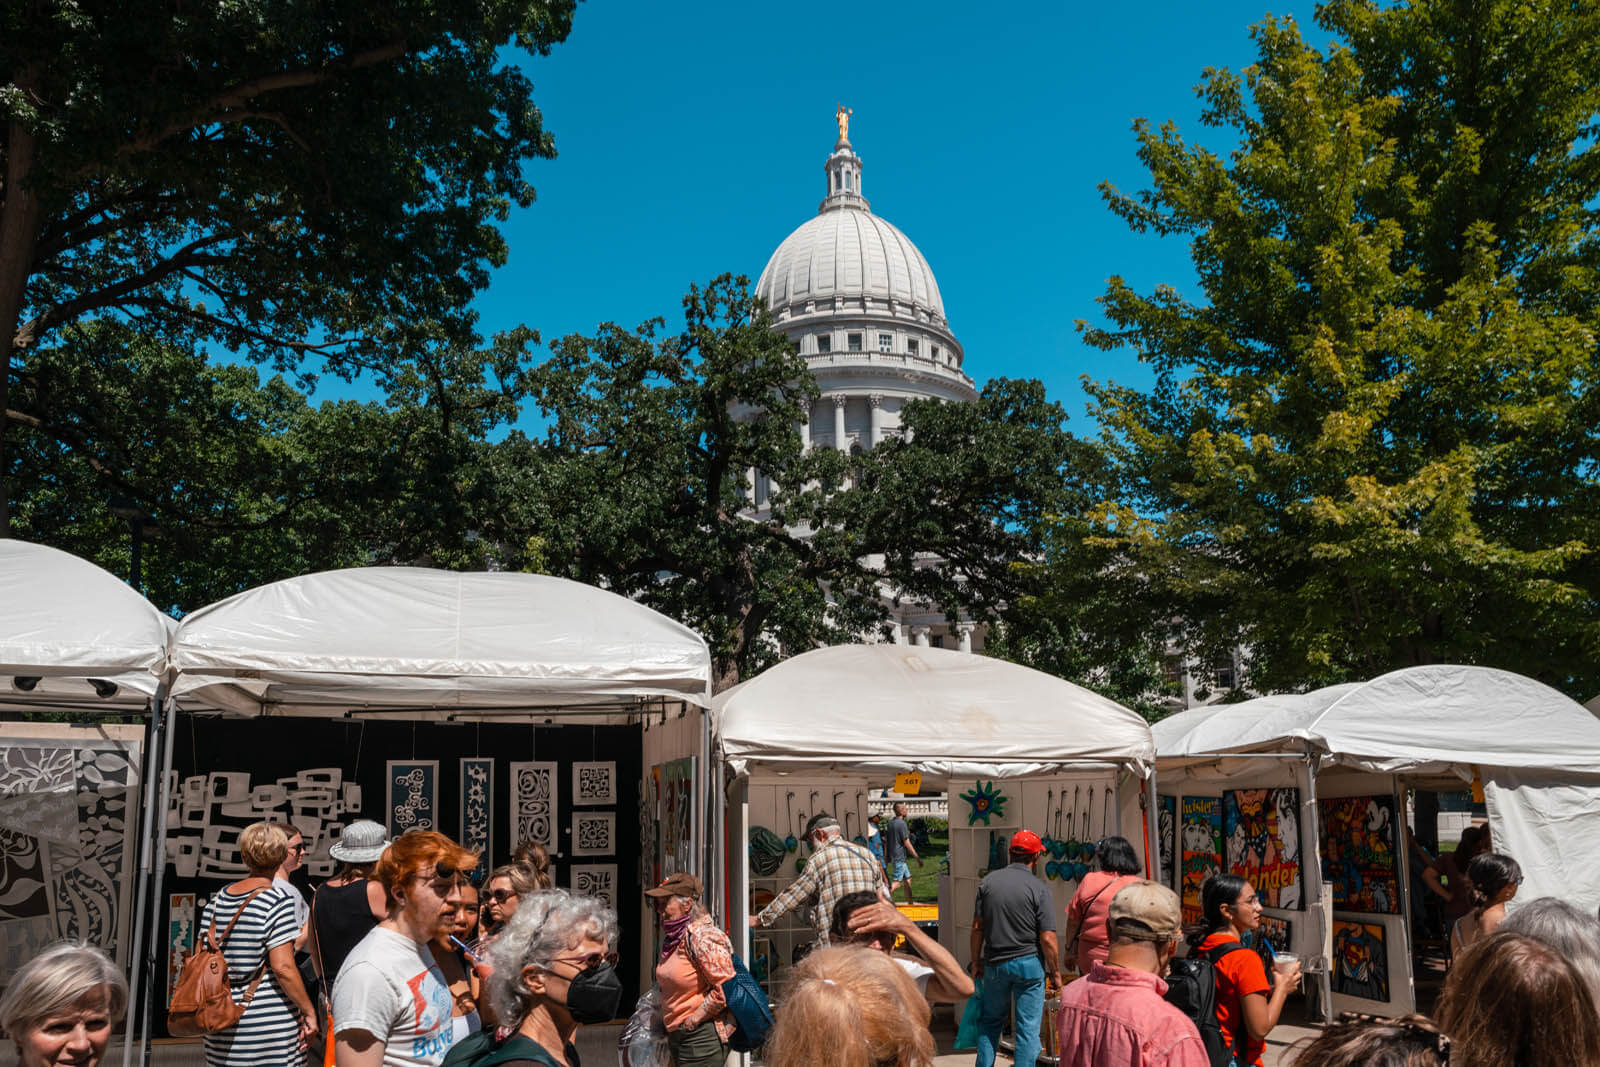 Art Fair on the Square in Madison Wisconsin